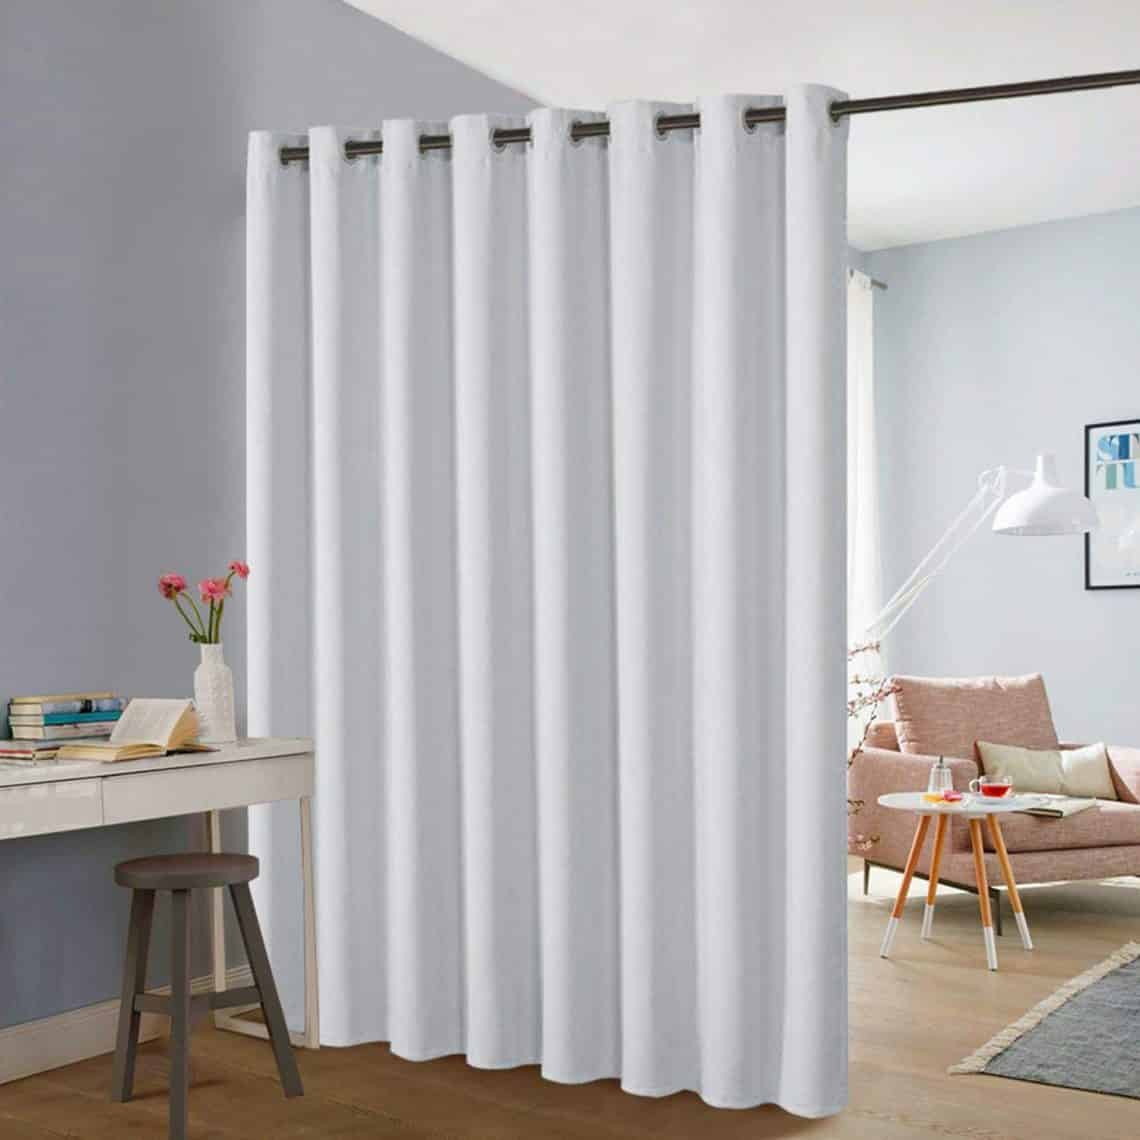 Top 10 Best Room Divider Curtains in 2023 Reviews | Buyer's Guide